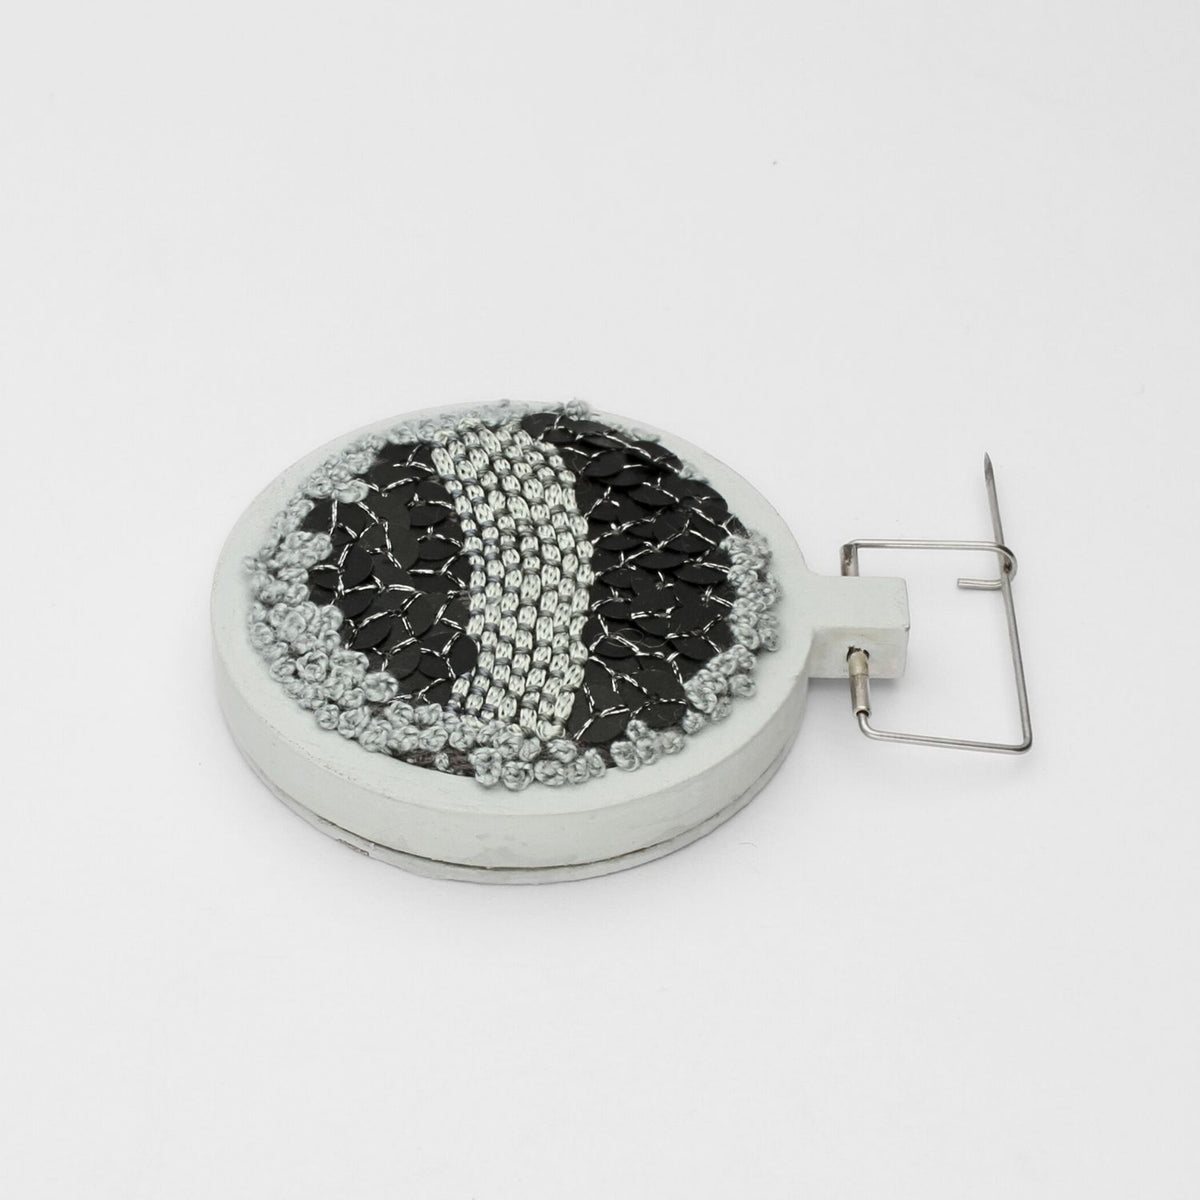 Brooch - sequined with French knitted stripe by Beatrice Mayfield